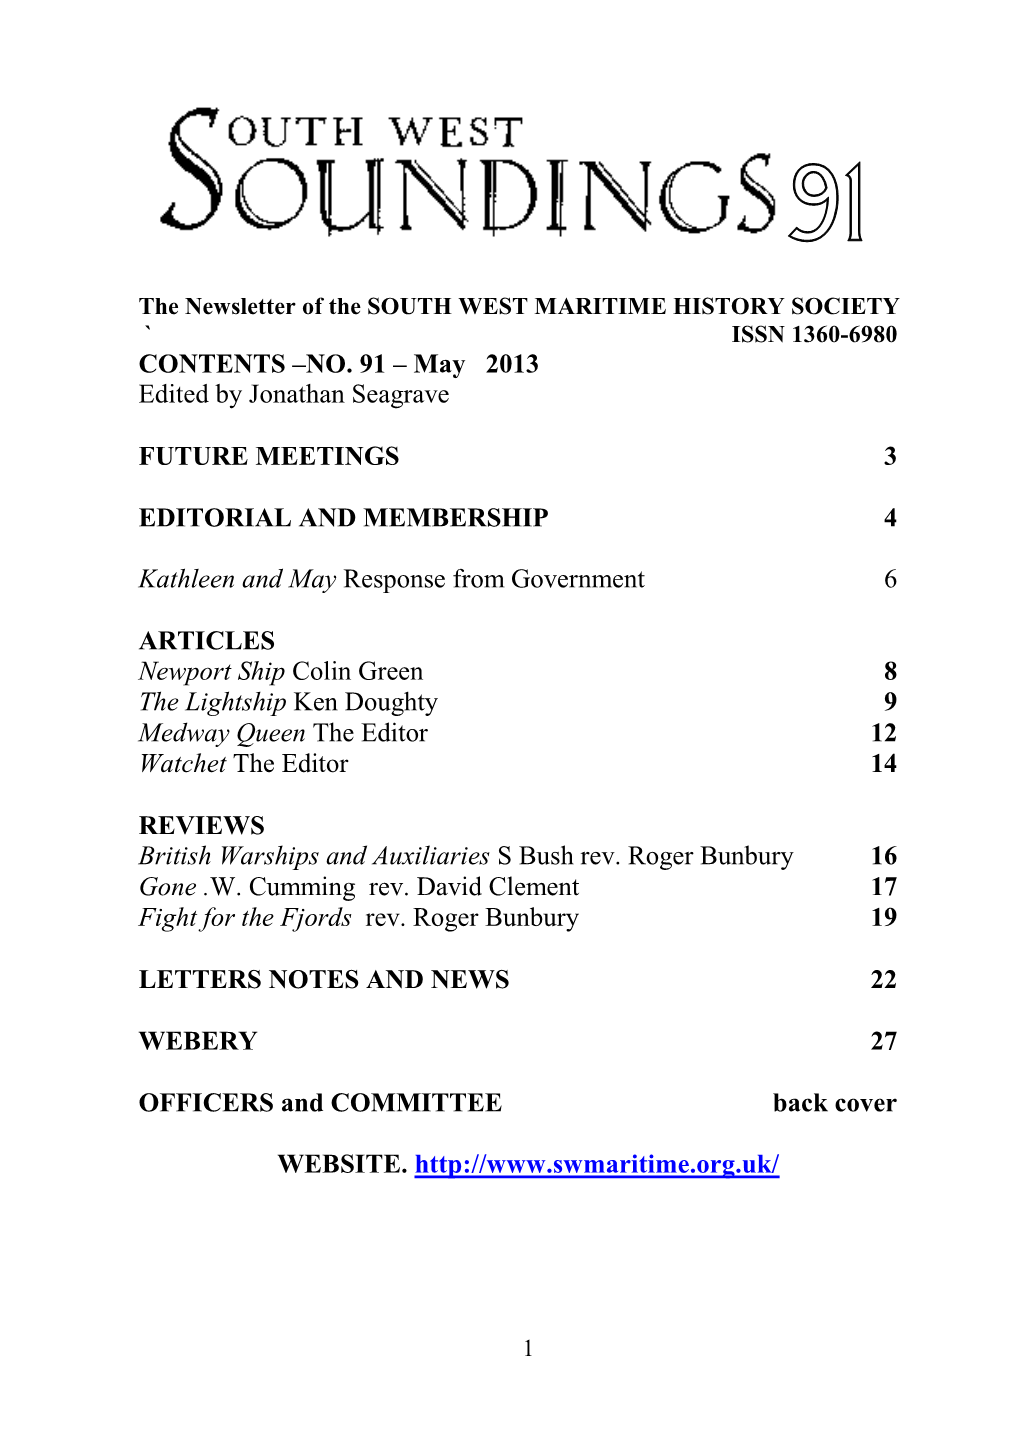 CONTENTS –NO. 91 – May 2013 Edited by Jonathan Seagrave